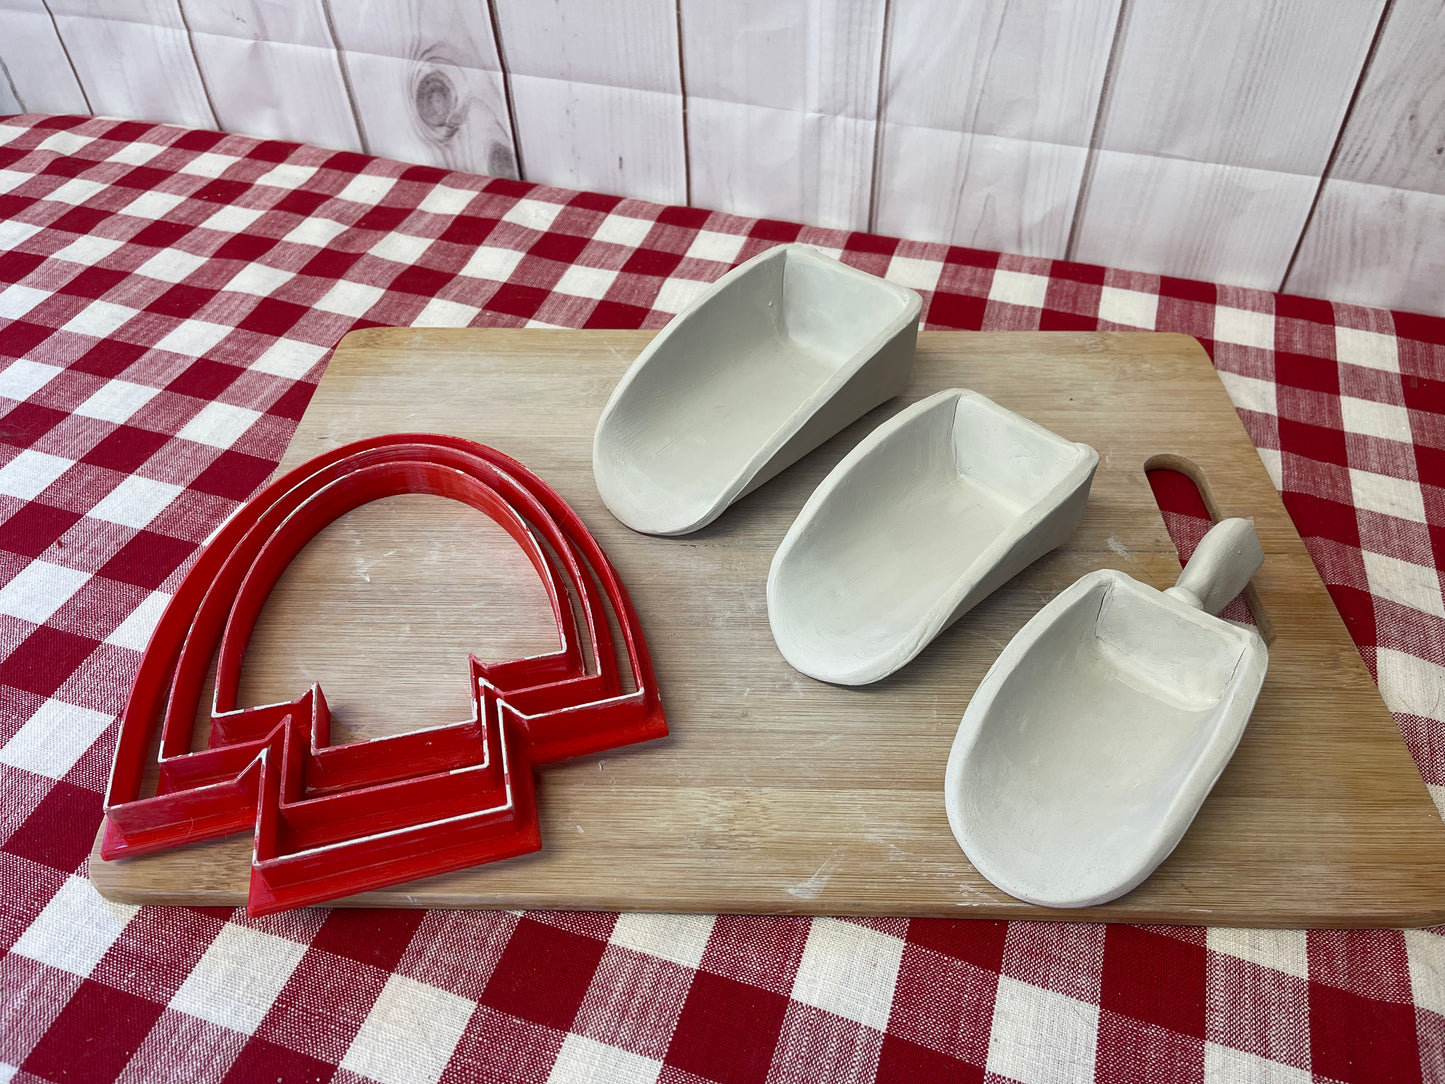 Scoops Clay Cutter - Template, Plastic 3D Printed, 3 sizes, Set or Each